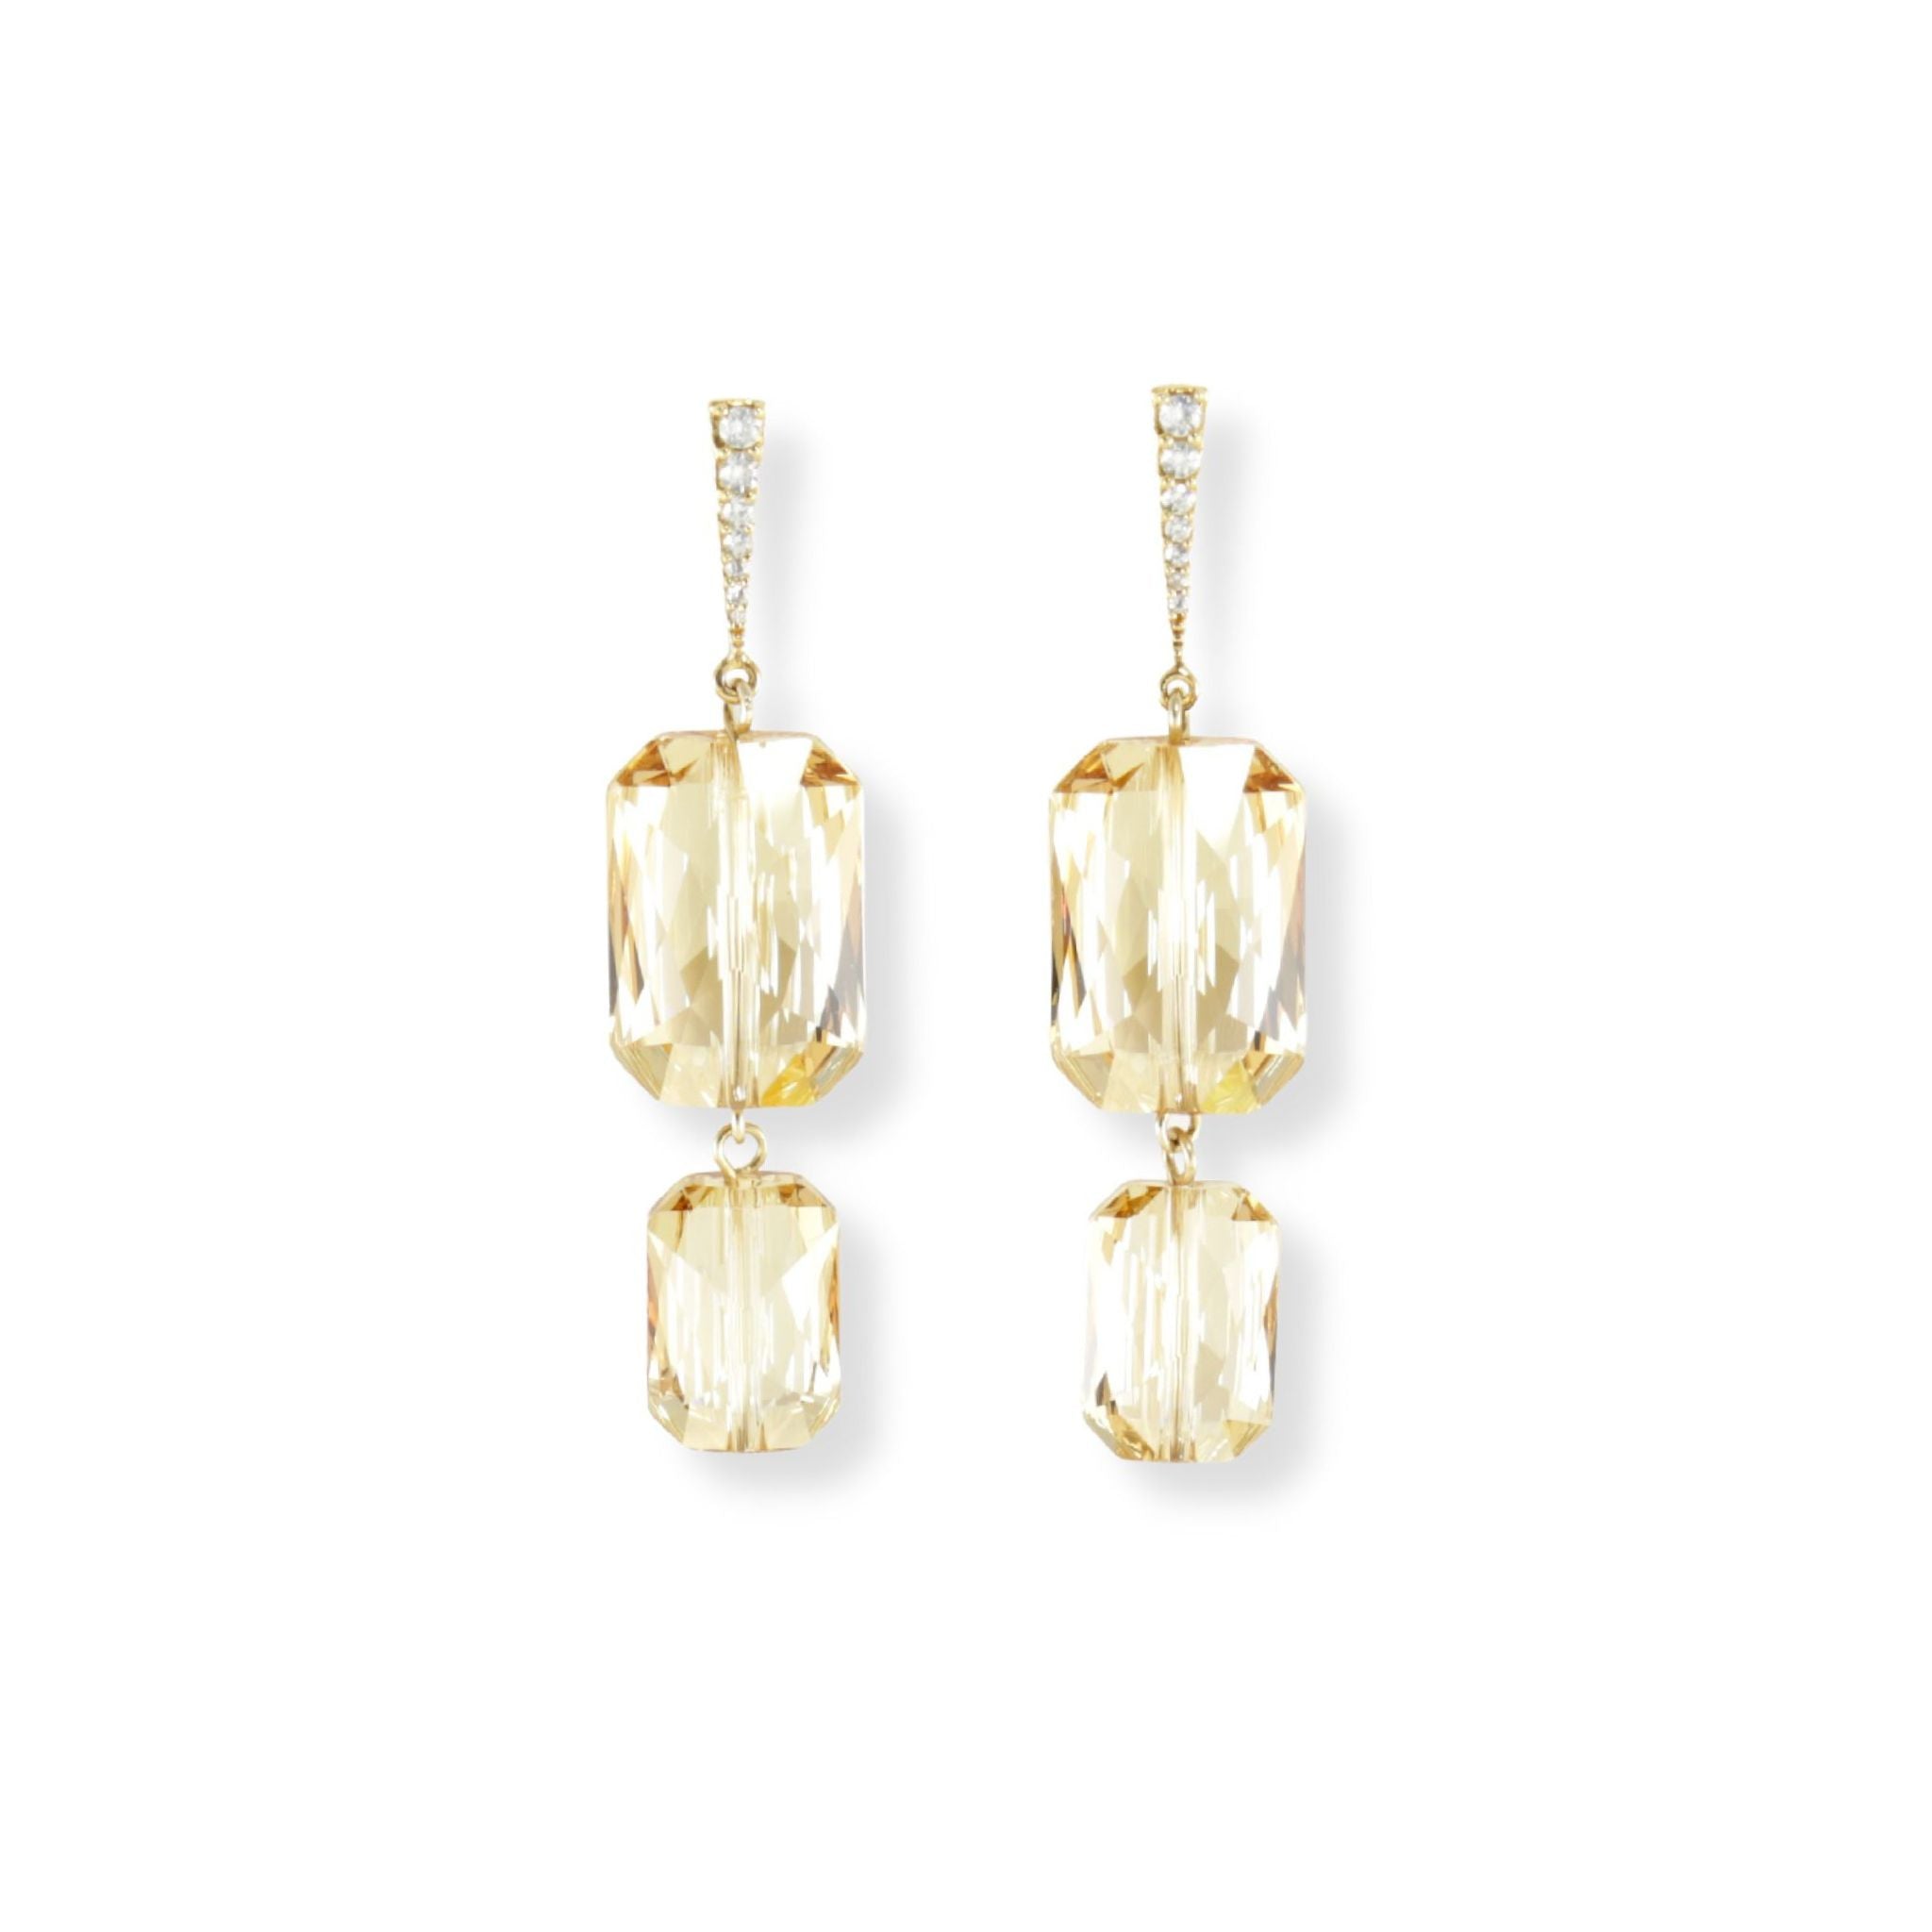 Emerald cut Swarovski crystal pendant earrings in an elegant, light golden color displayed on a cubic zirconia & gold plated silver rectangle ear stud